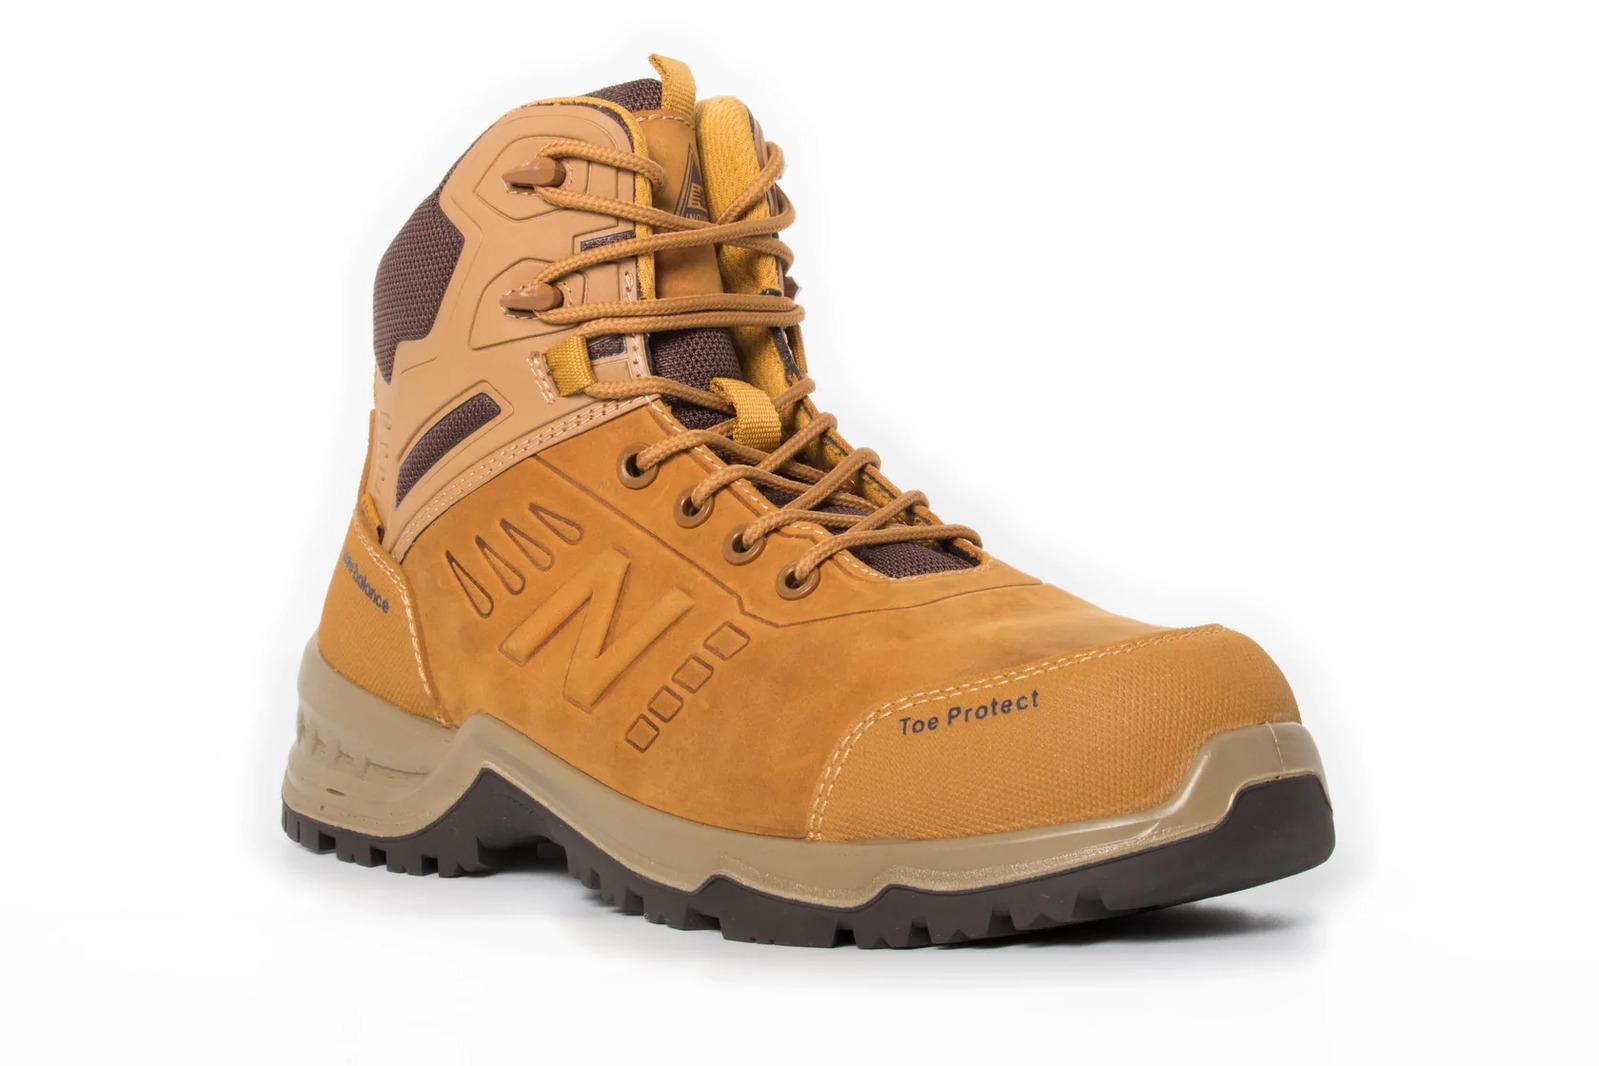 New Balance Mens Contour Steel Toe Cap Safety Work Boots with Zip - Wheat - US 8.5 Width:4E